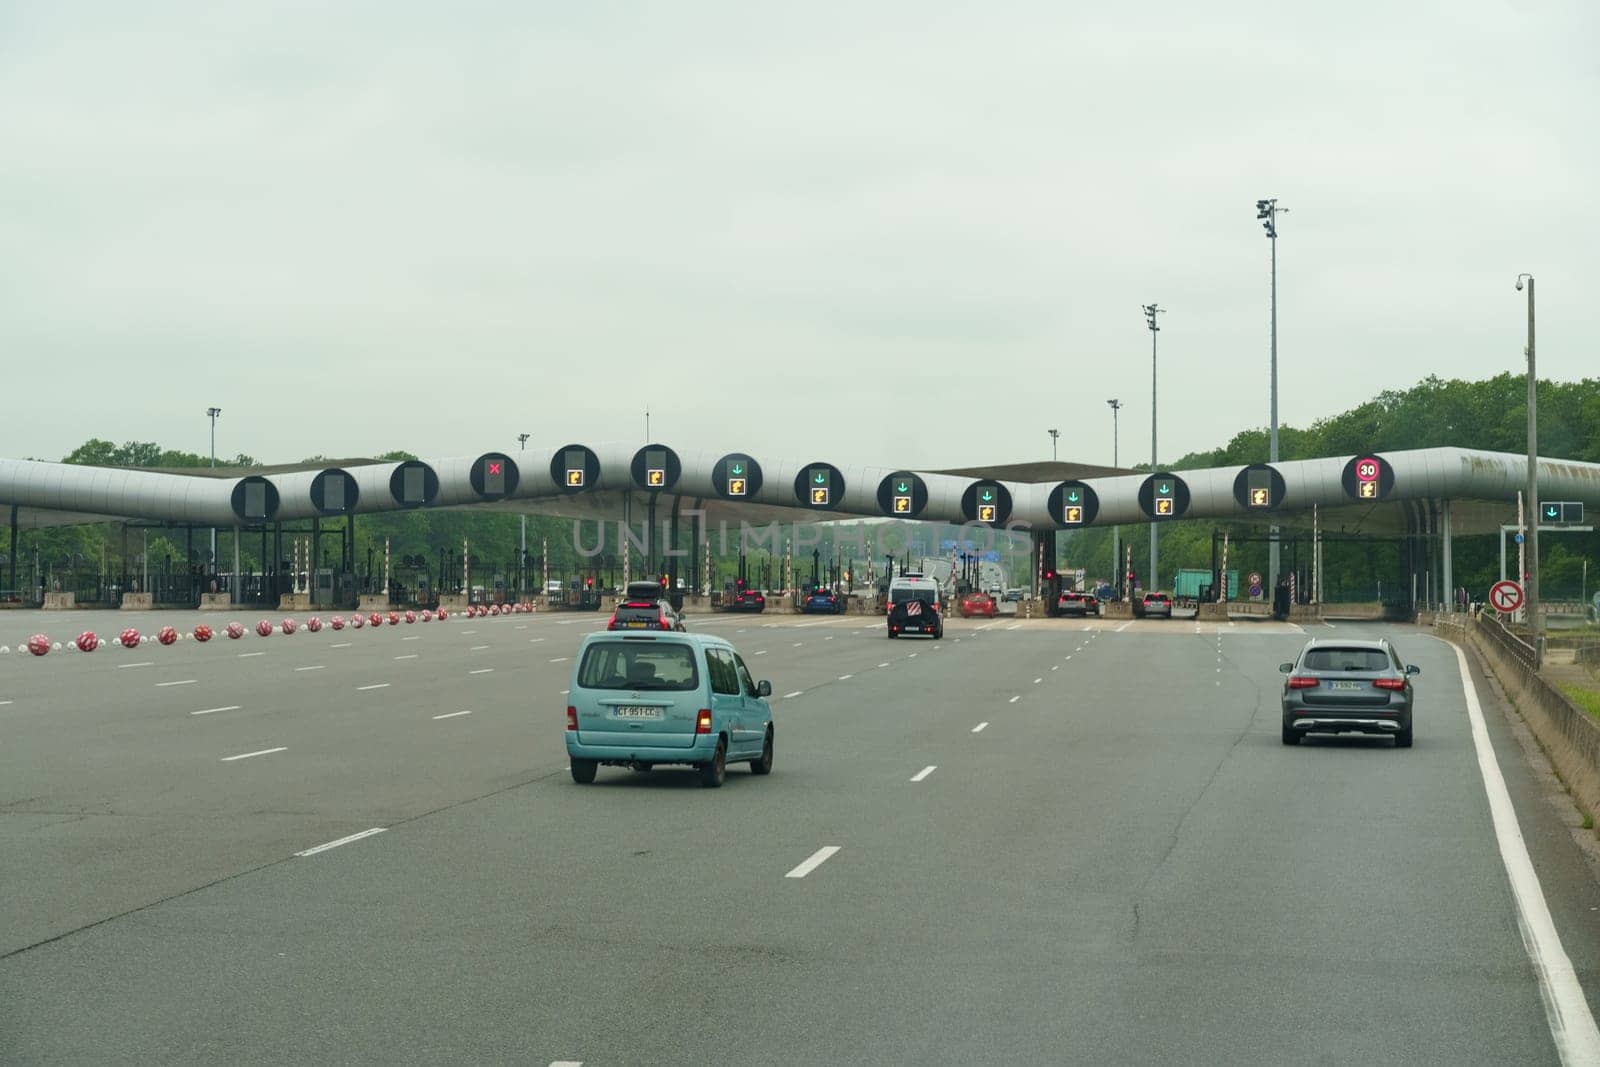 Lille, France - May 23, 2023: Vehicles line up to pay tolls at a modern toll plaza with multiple booths and electronic lane indicators on a cloudy day.